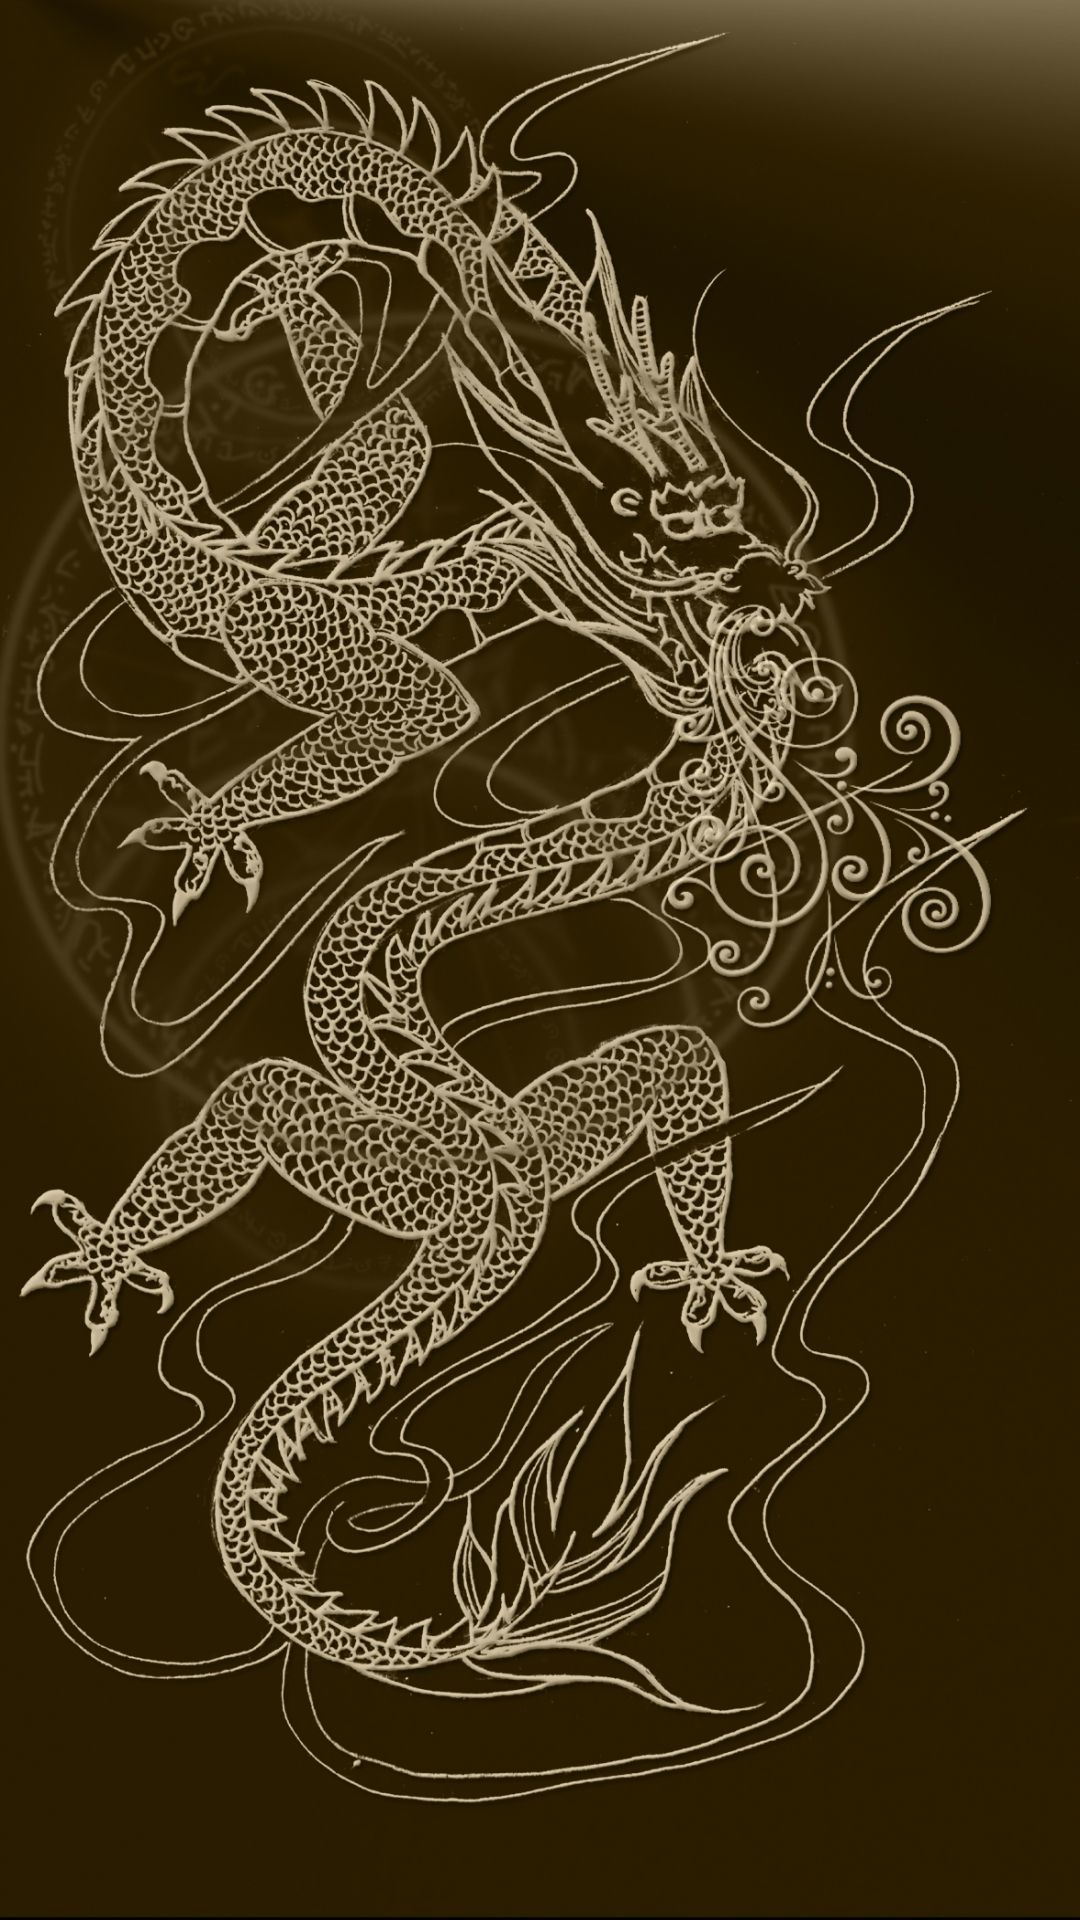 Chinese Dragon iPhone Wallpaper Free Chinese Dragon iPhone Background